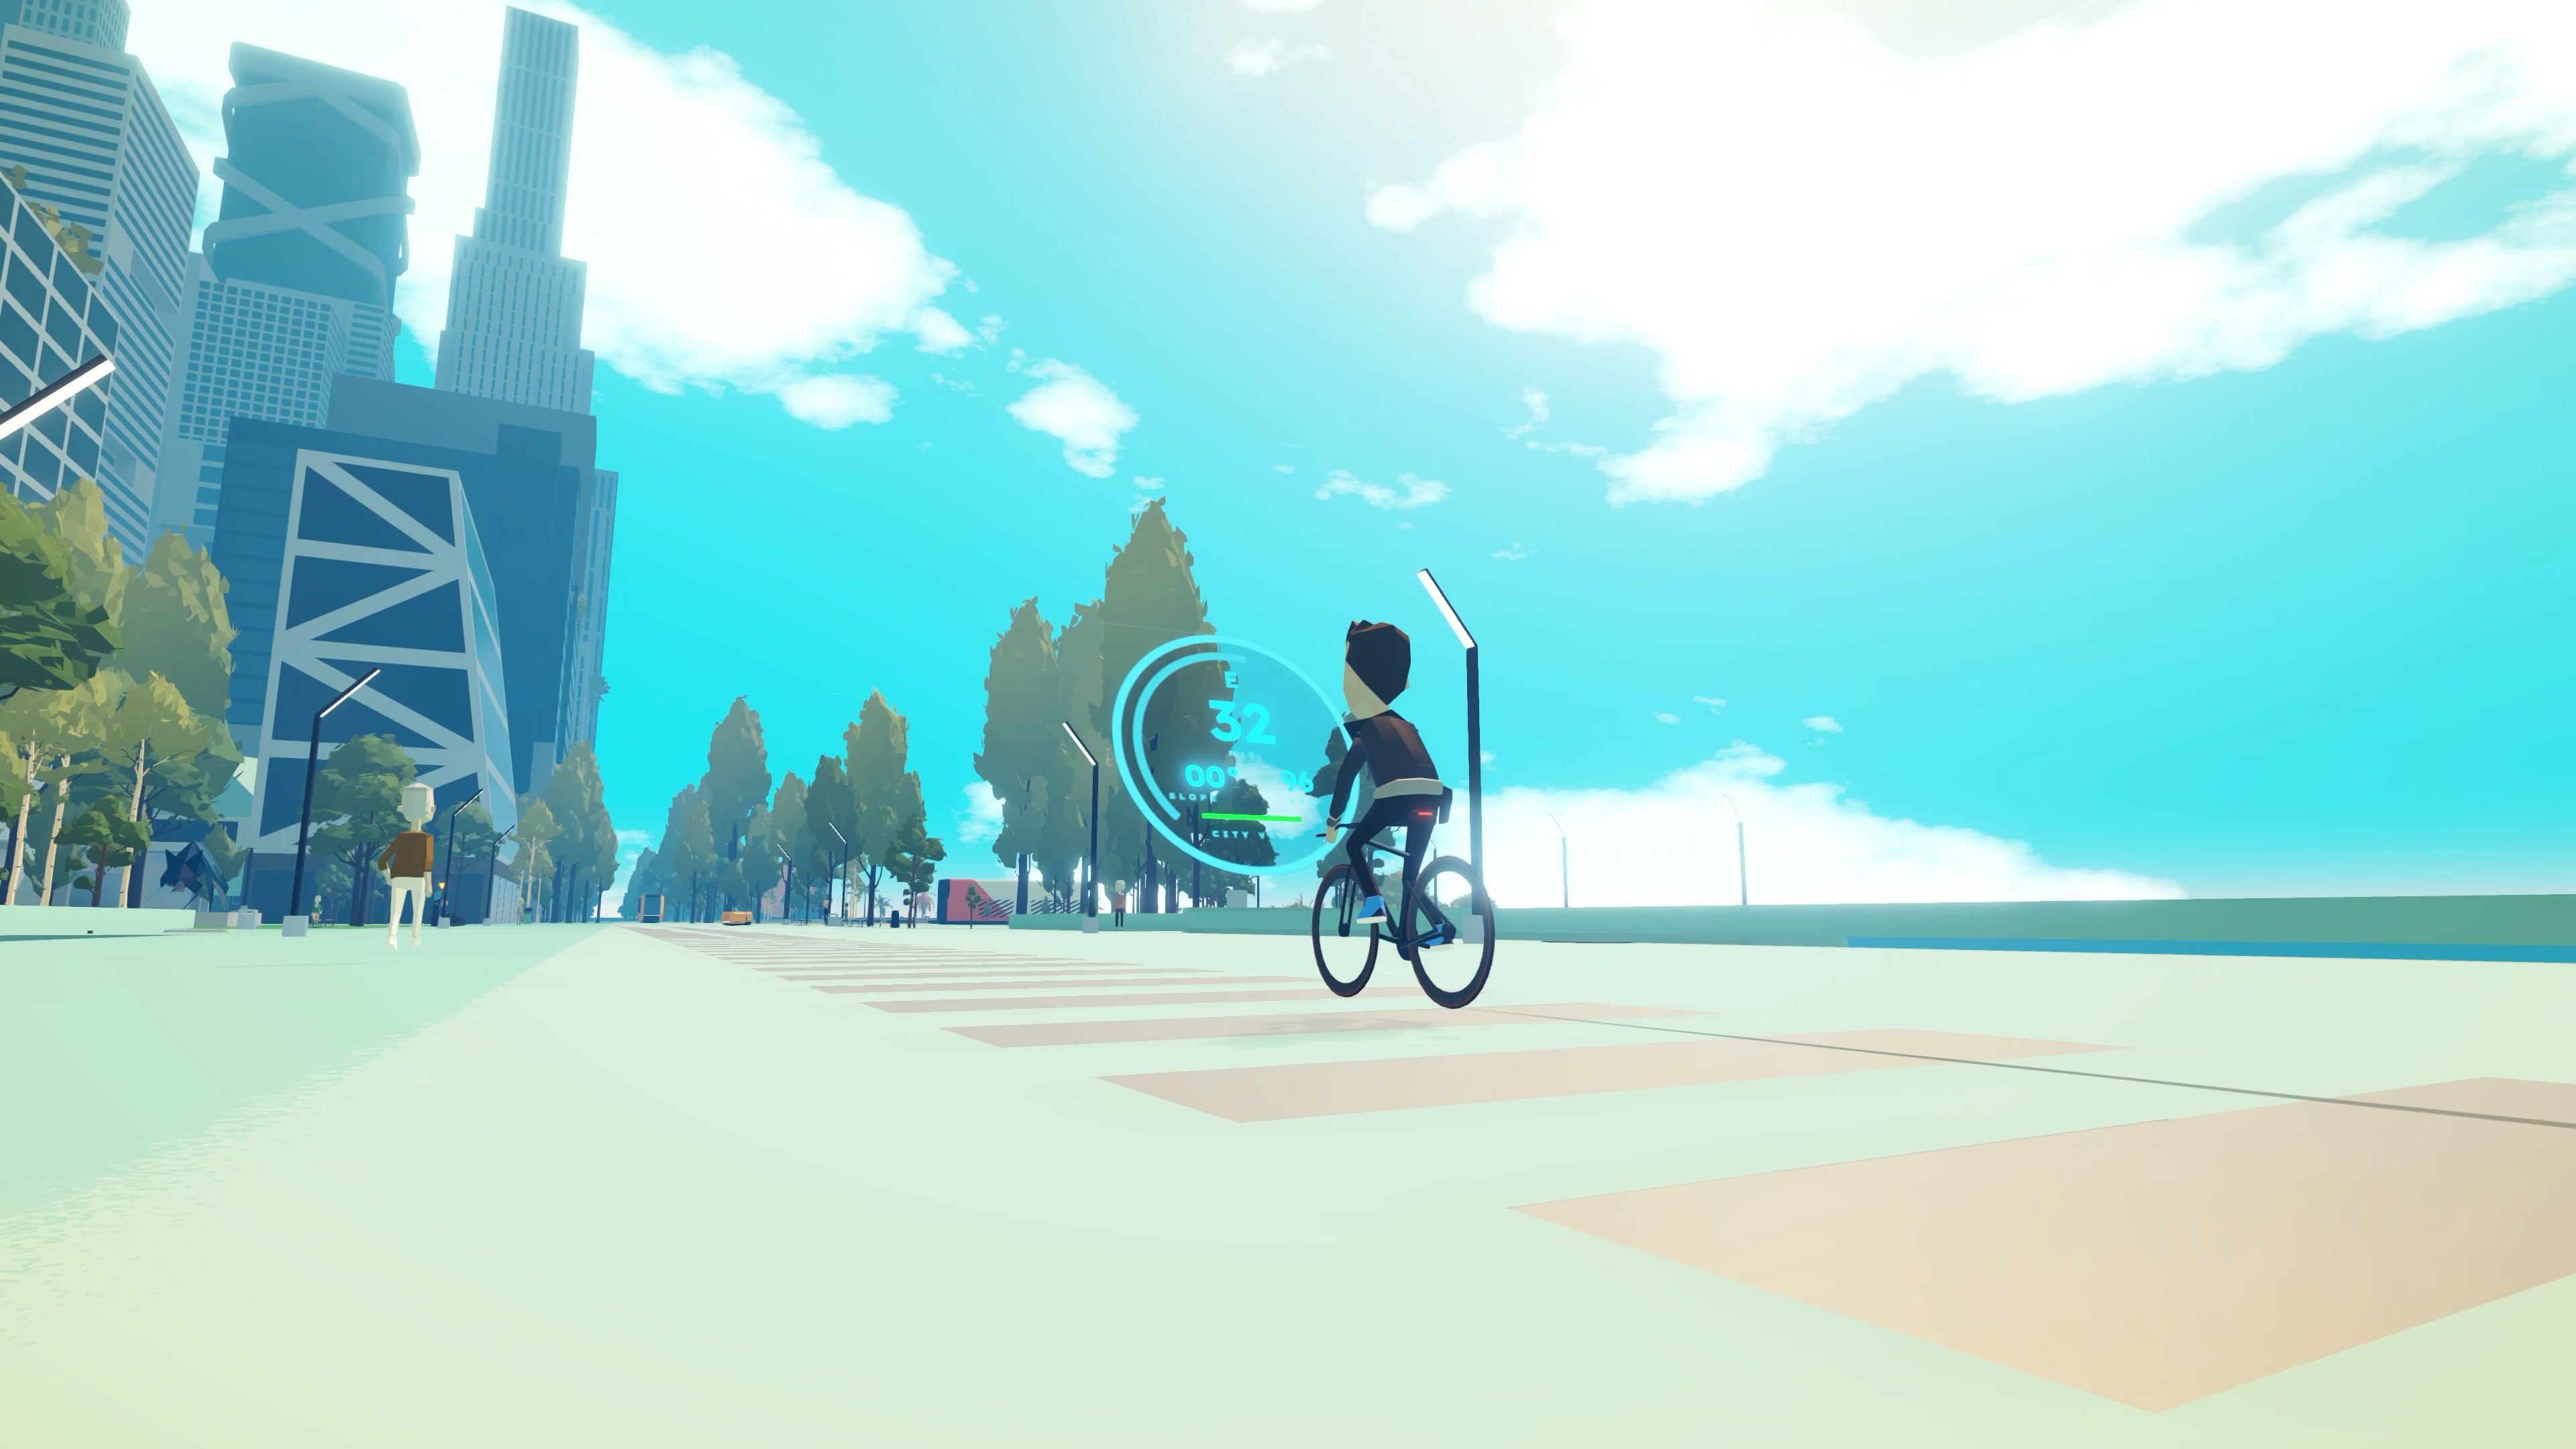 Protagonist riding bicycle